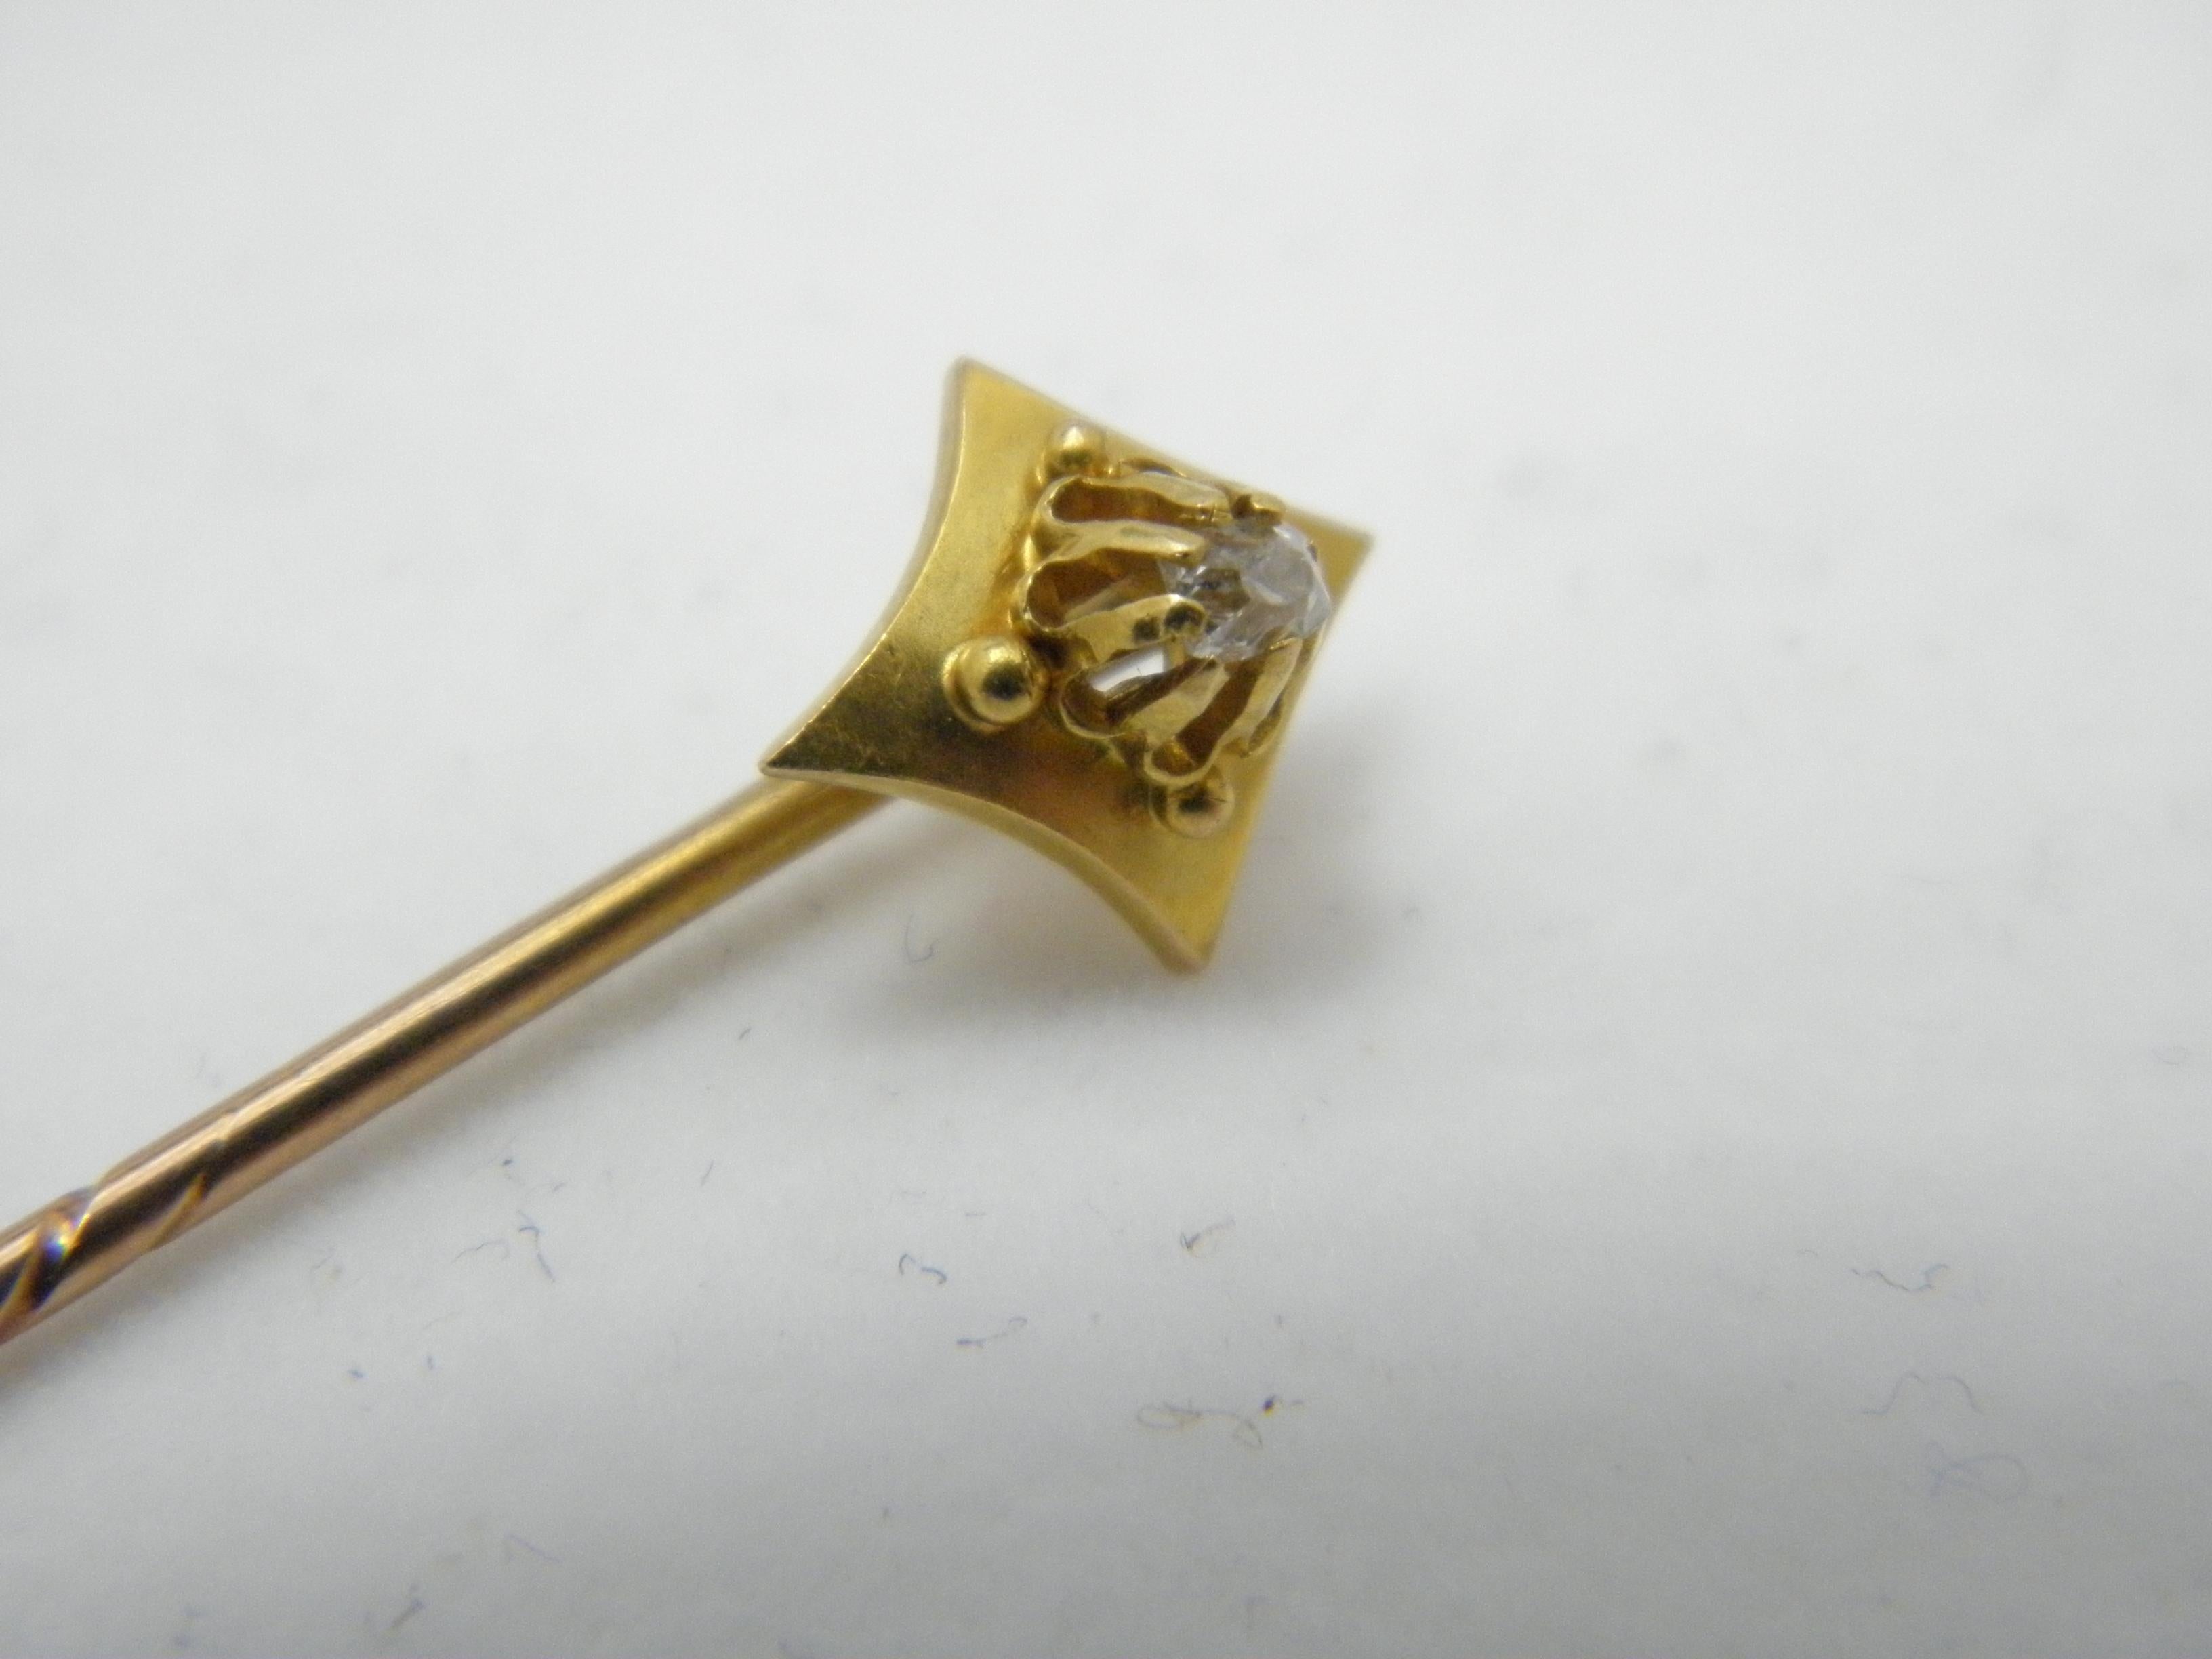 Victorian Antique 15ct Gold Diamond Stock Pin Brooch c1860 Heavy 625 Purity Tie Lapel Hat For Sale